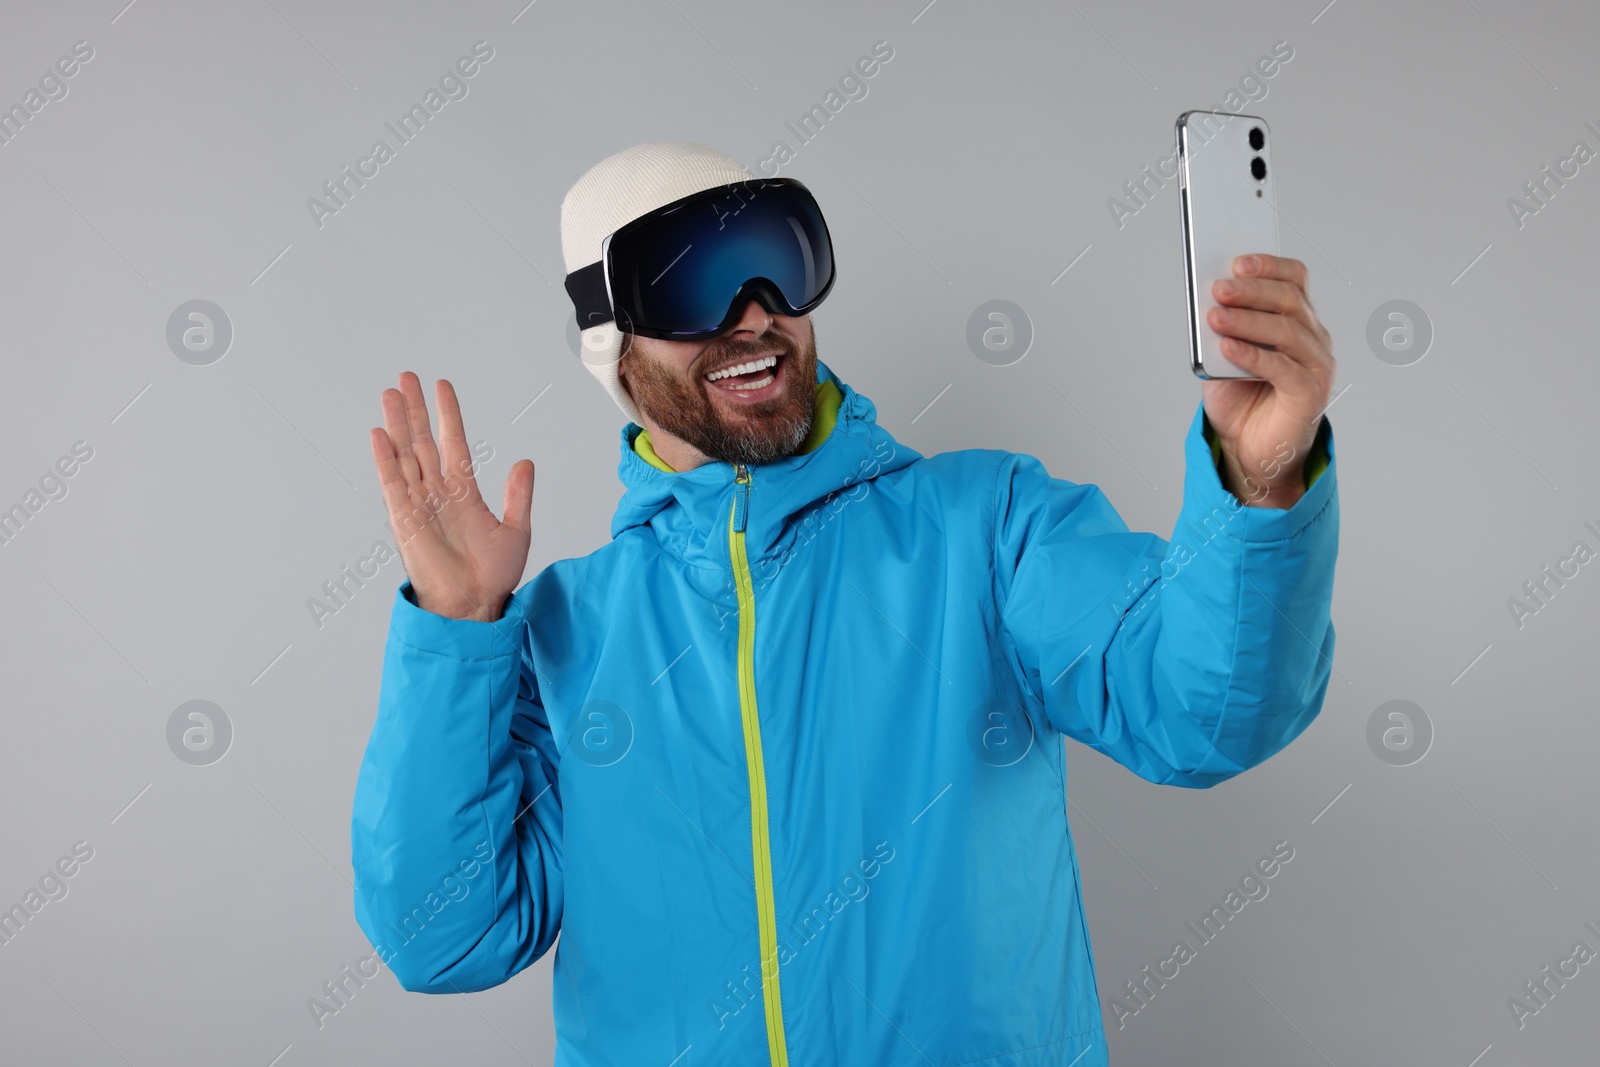 Photo of Winter sports. Happy man in ski suit and goggles taking selfie on gray background